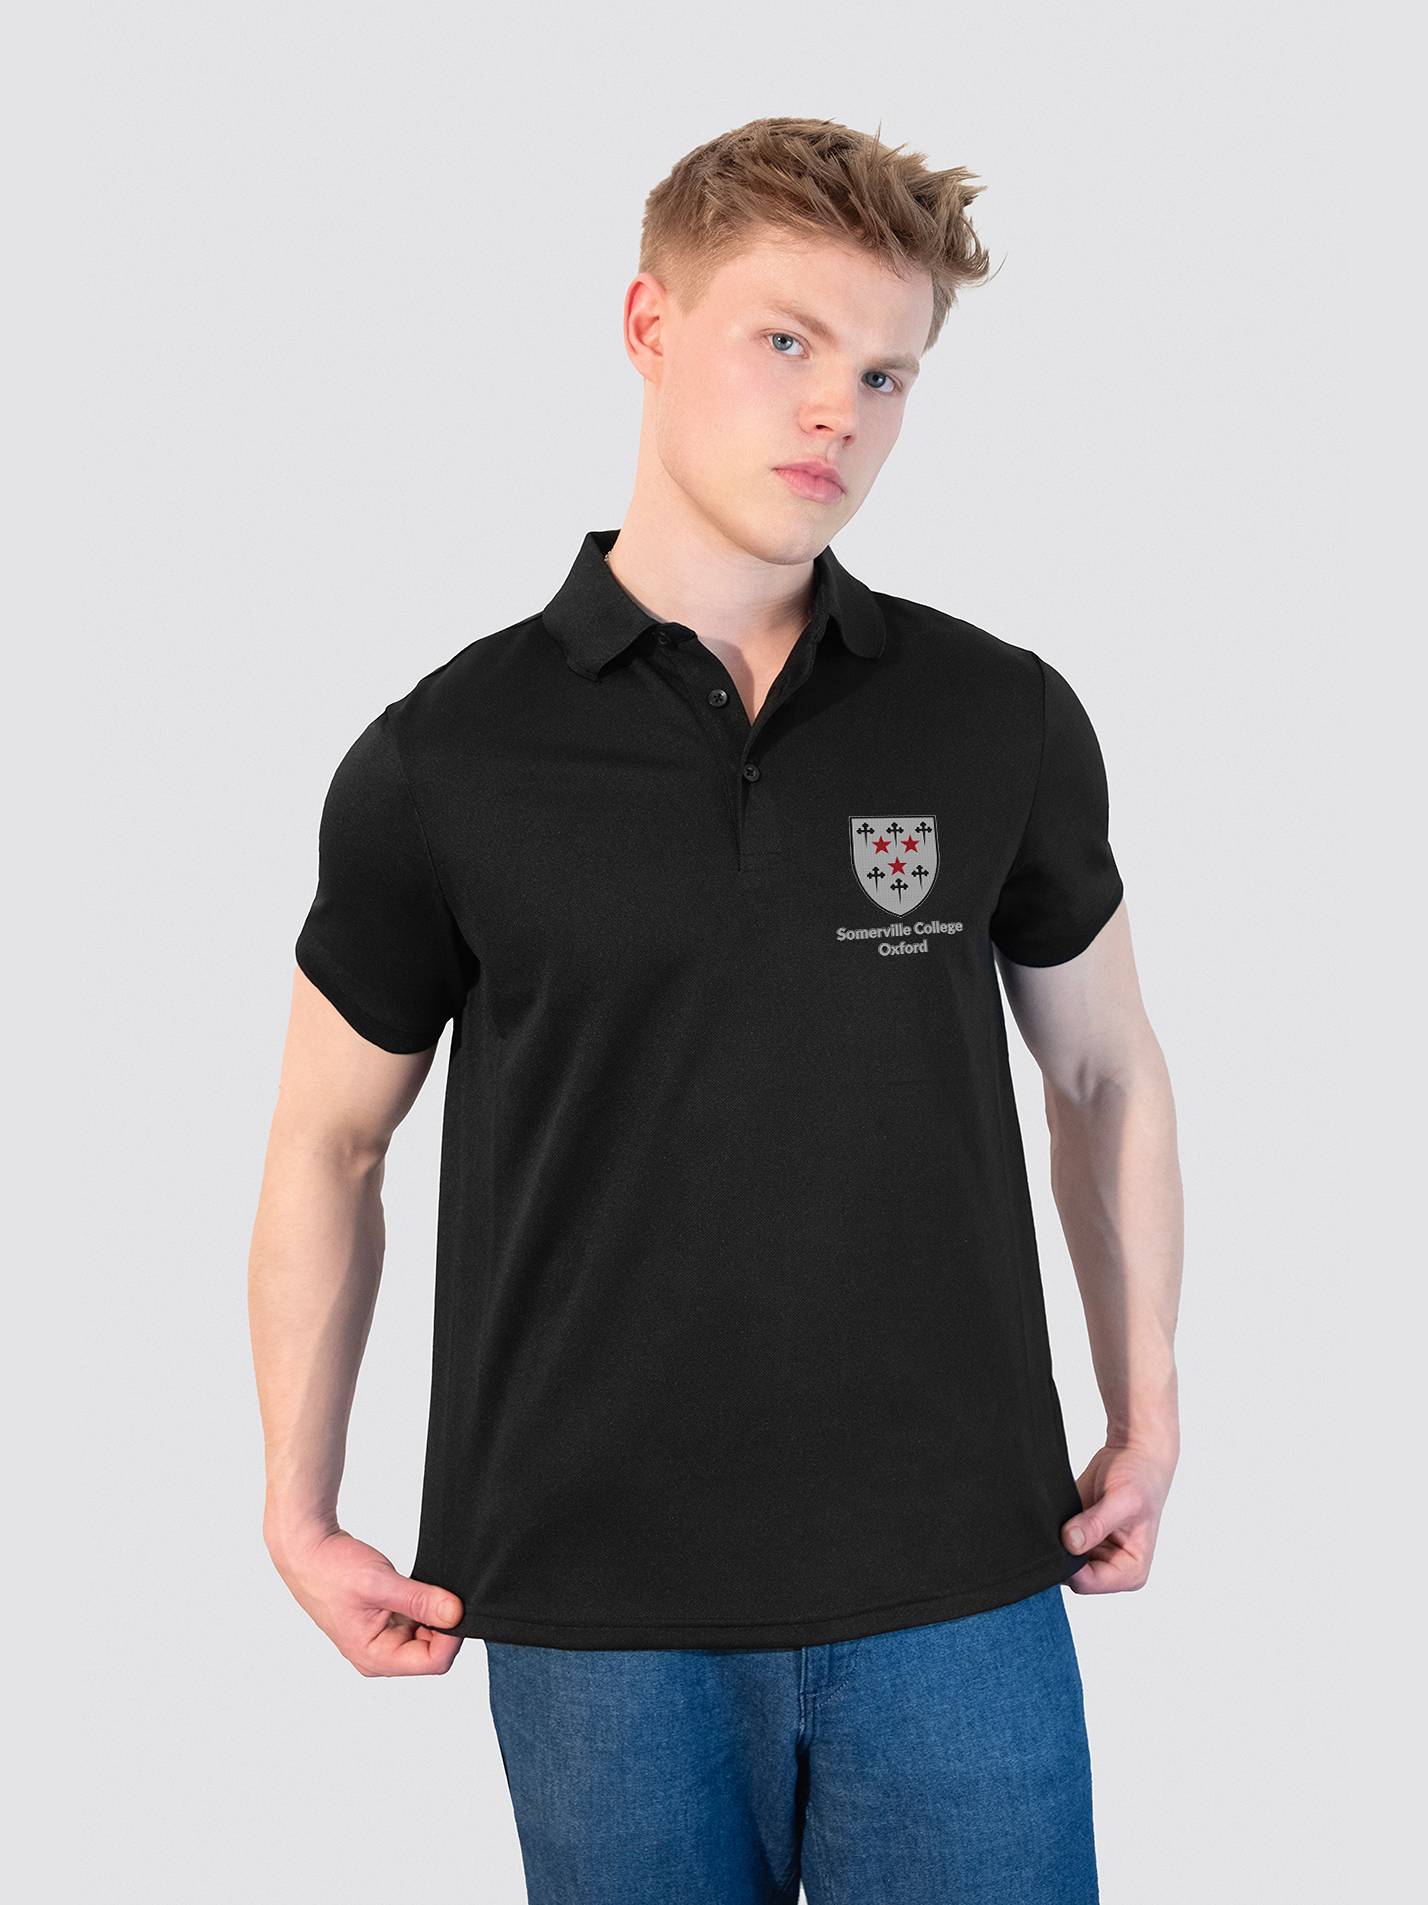 Somerville College Oxford JCR Traditional Crest Sustainable Men's Polo Shirt